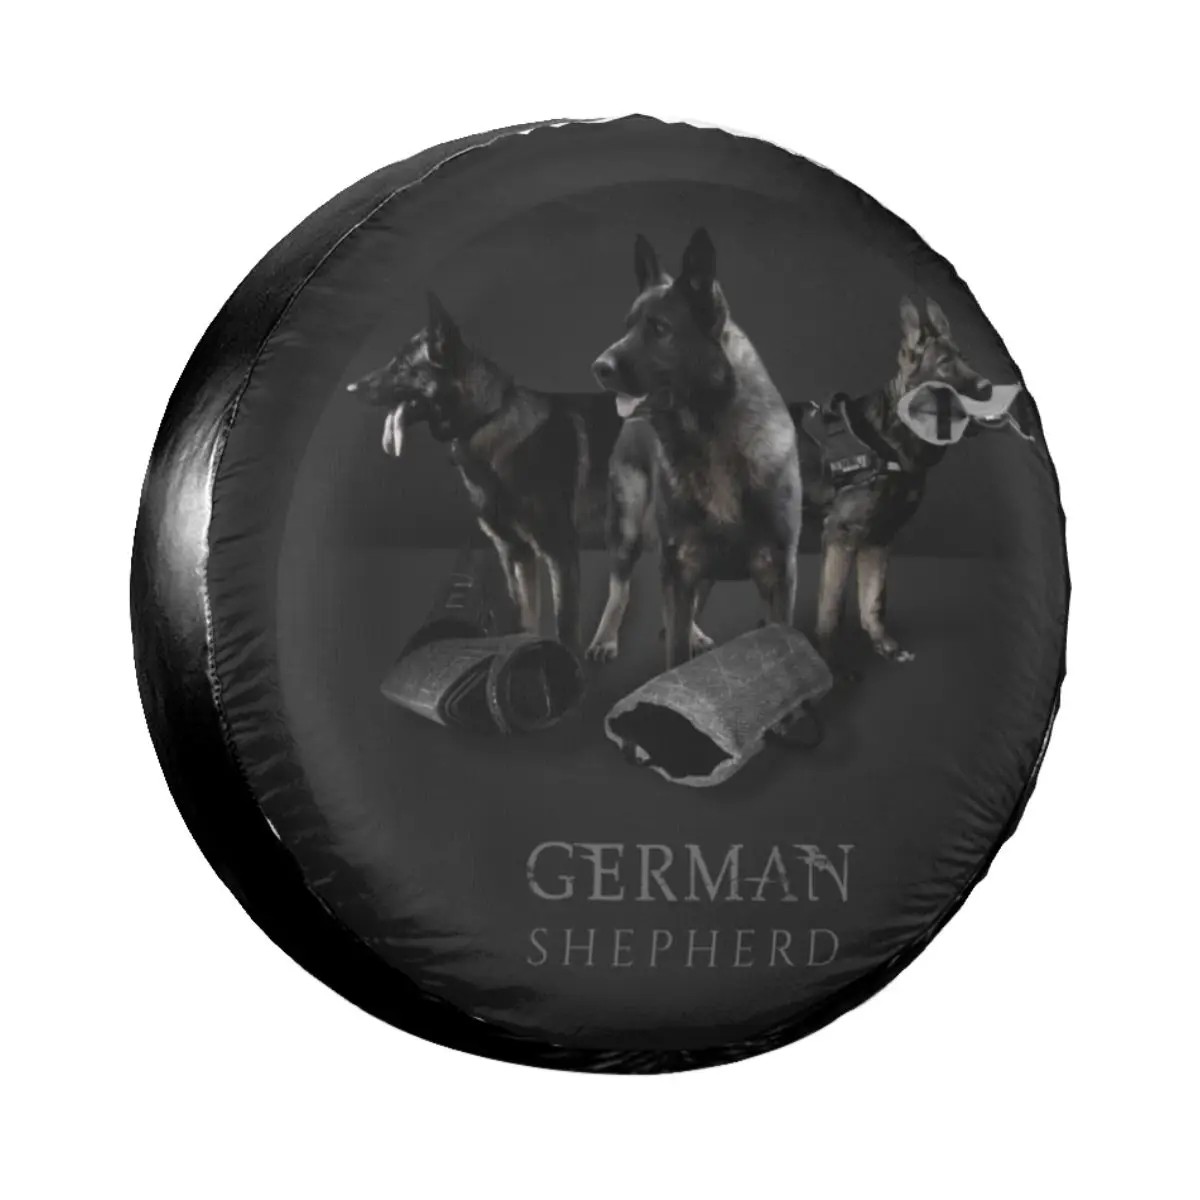 German Shepherd Dog Spare Tire Cover Bag Pouch for Jeep Pajero GSD Animal Dust-Proof Car Wheel Covers 14